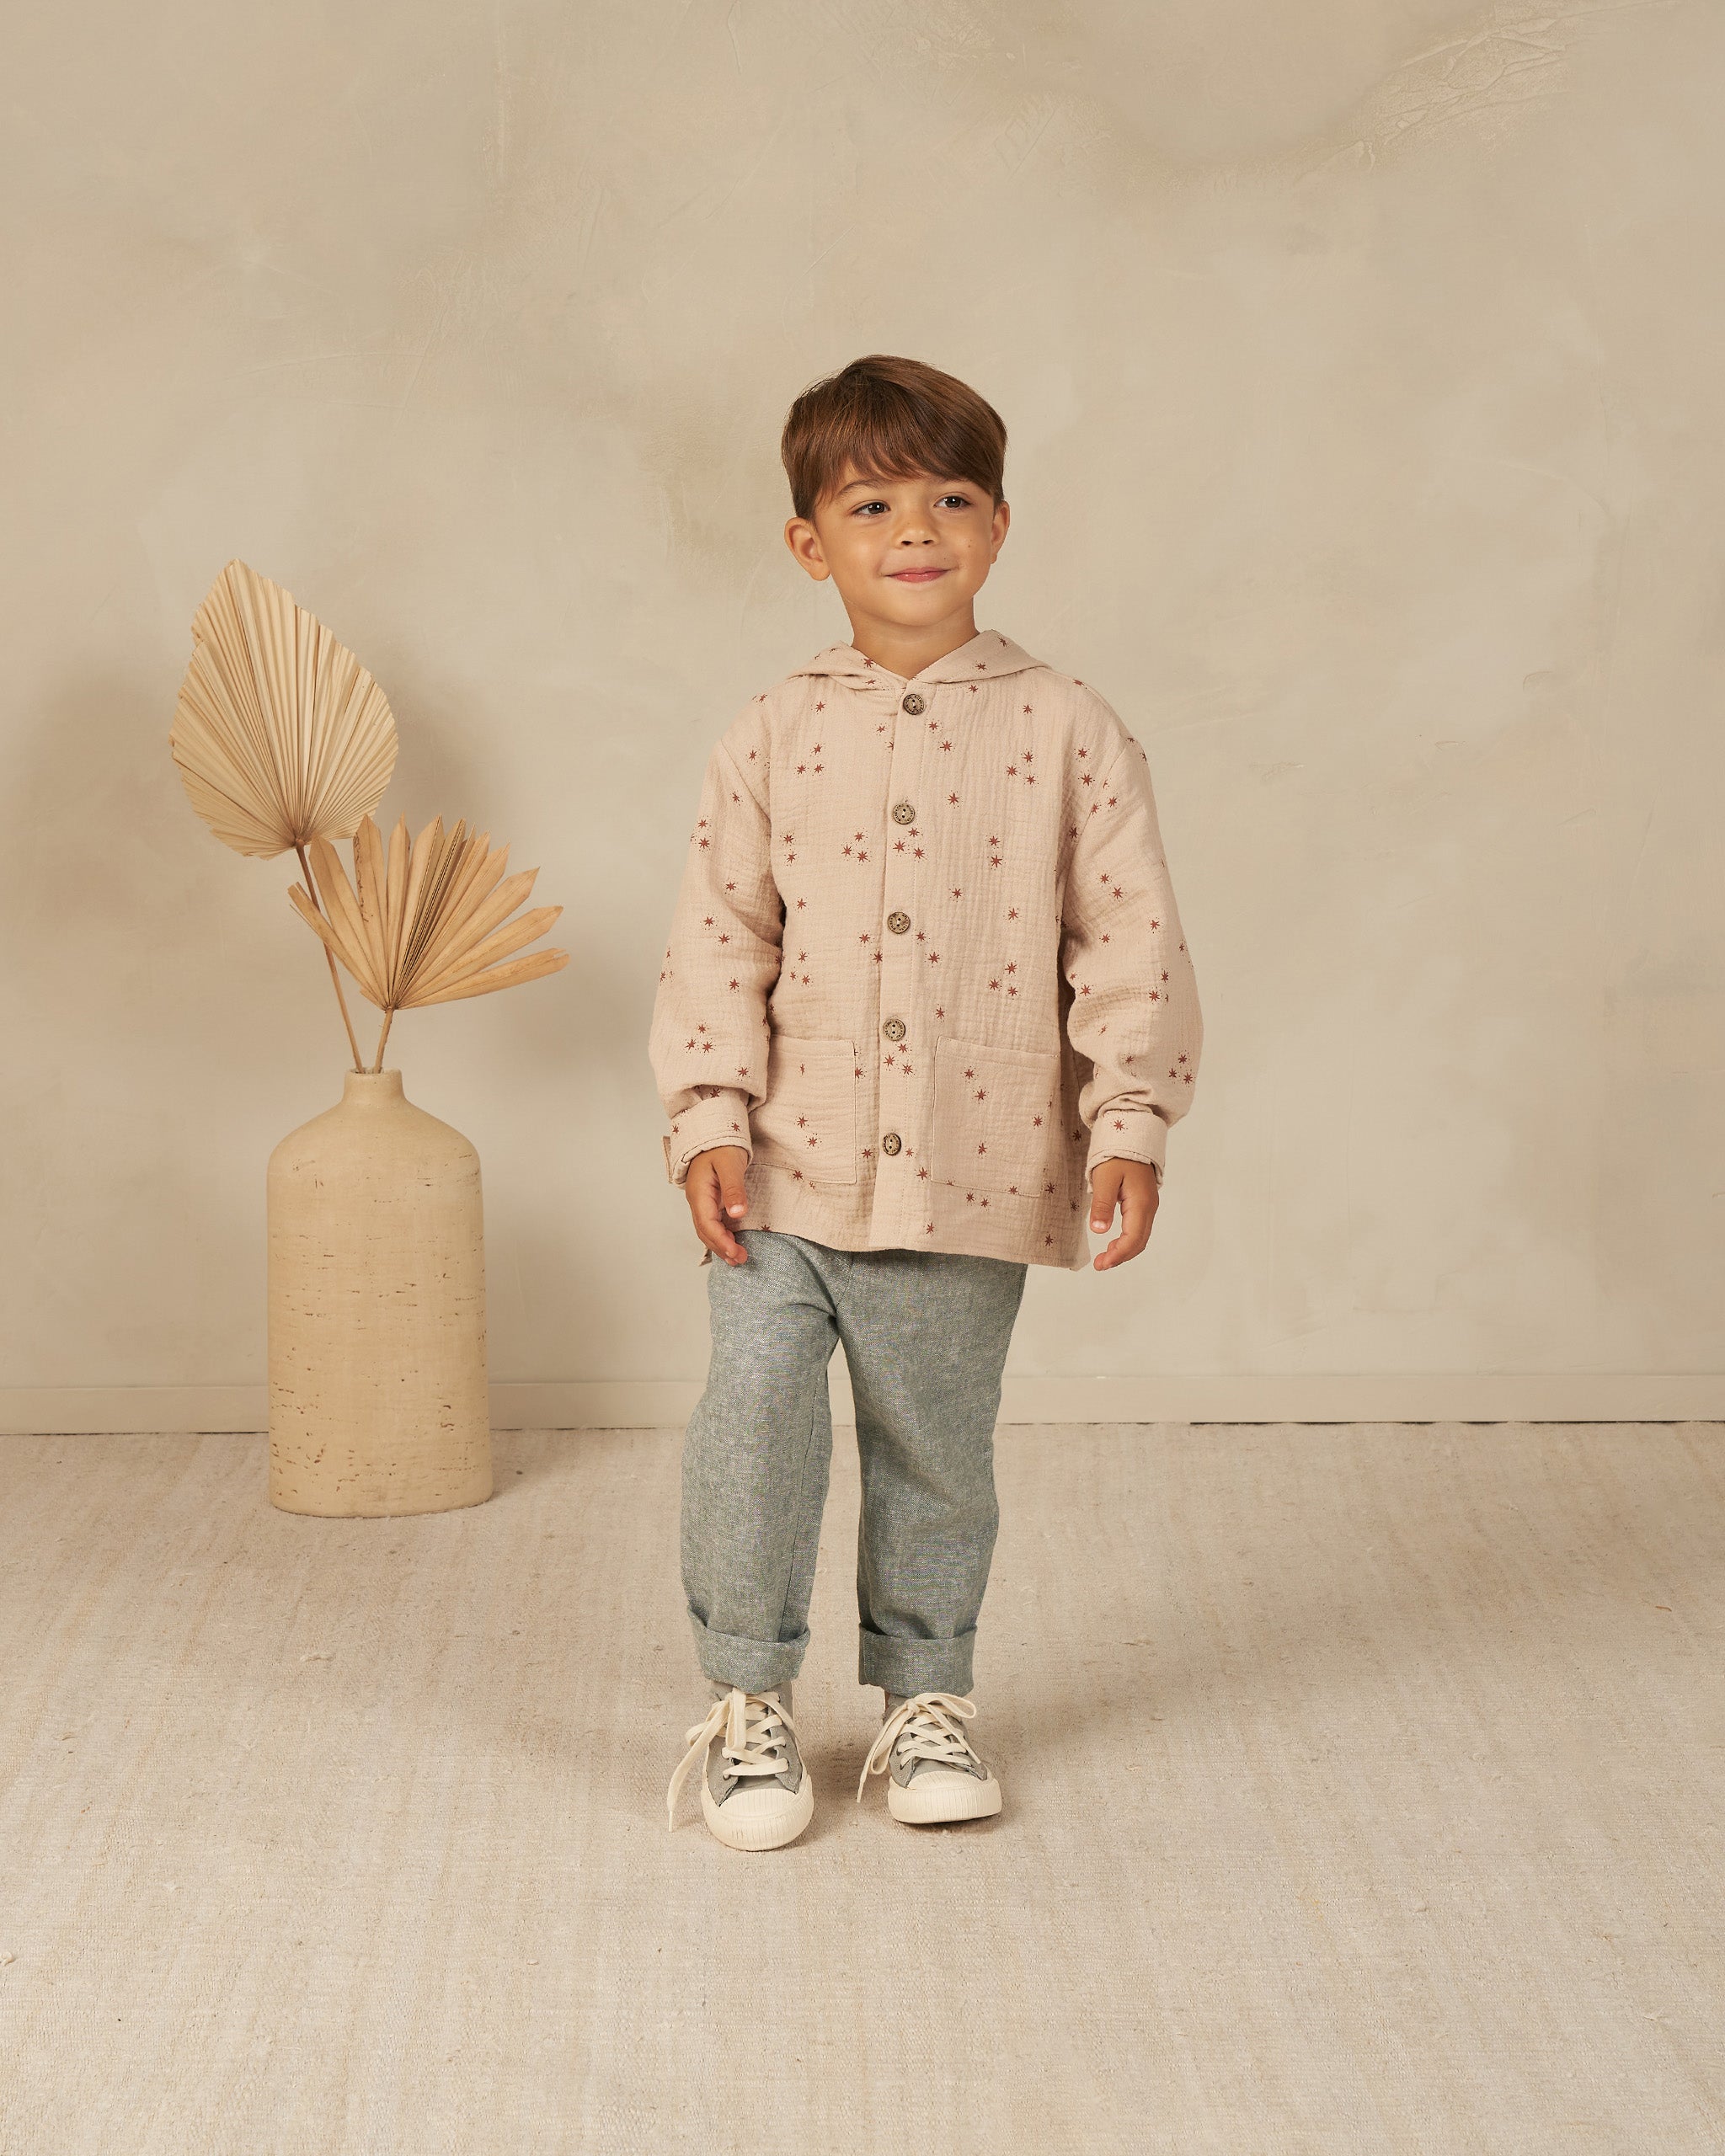 Kalen Pant || Heathered Indigo - Rylee + Cru | Kids Clothes | Trendy Baby Clothes | Modern Infant Outfits |